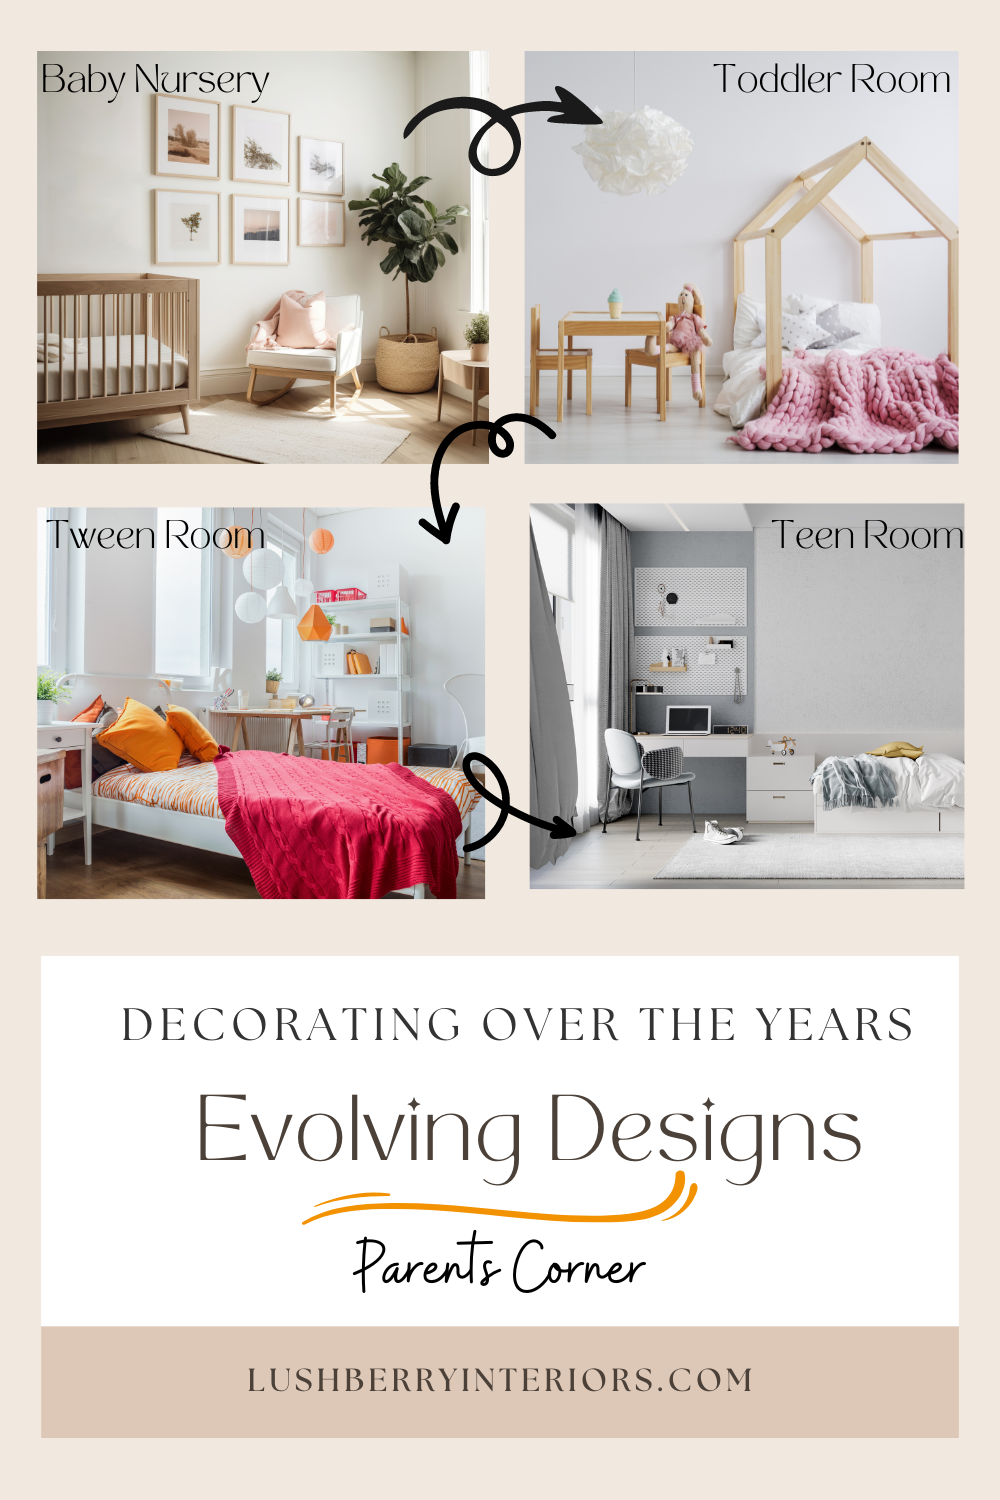 Bedroom Themes - Decorating Over the Years